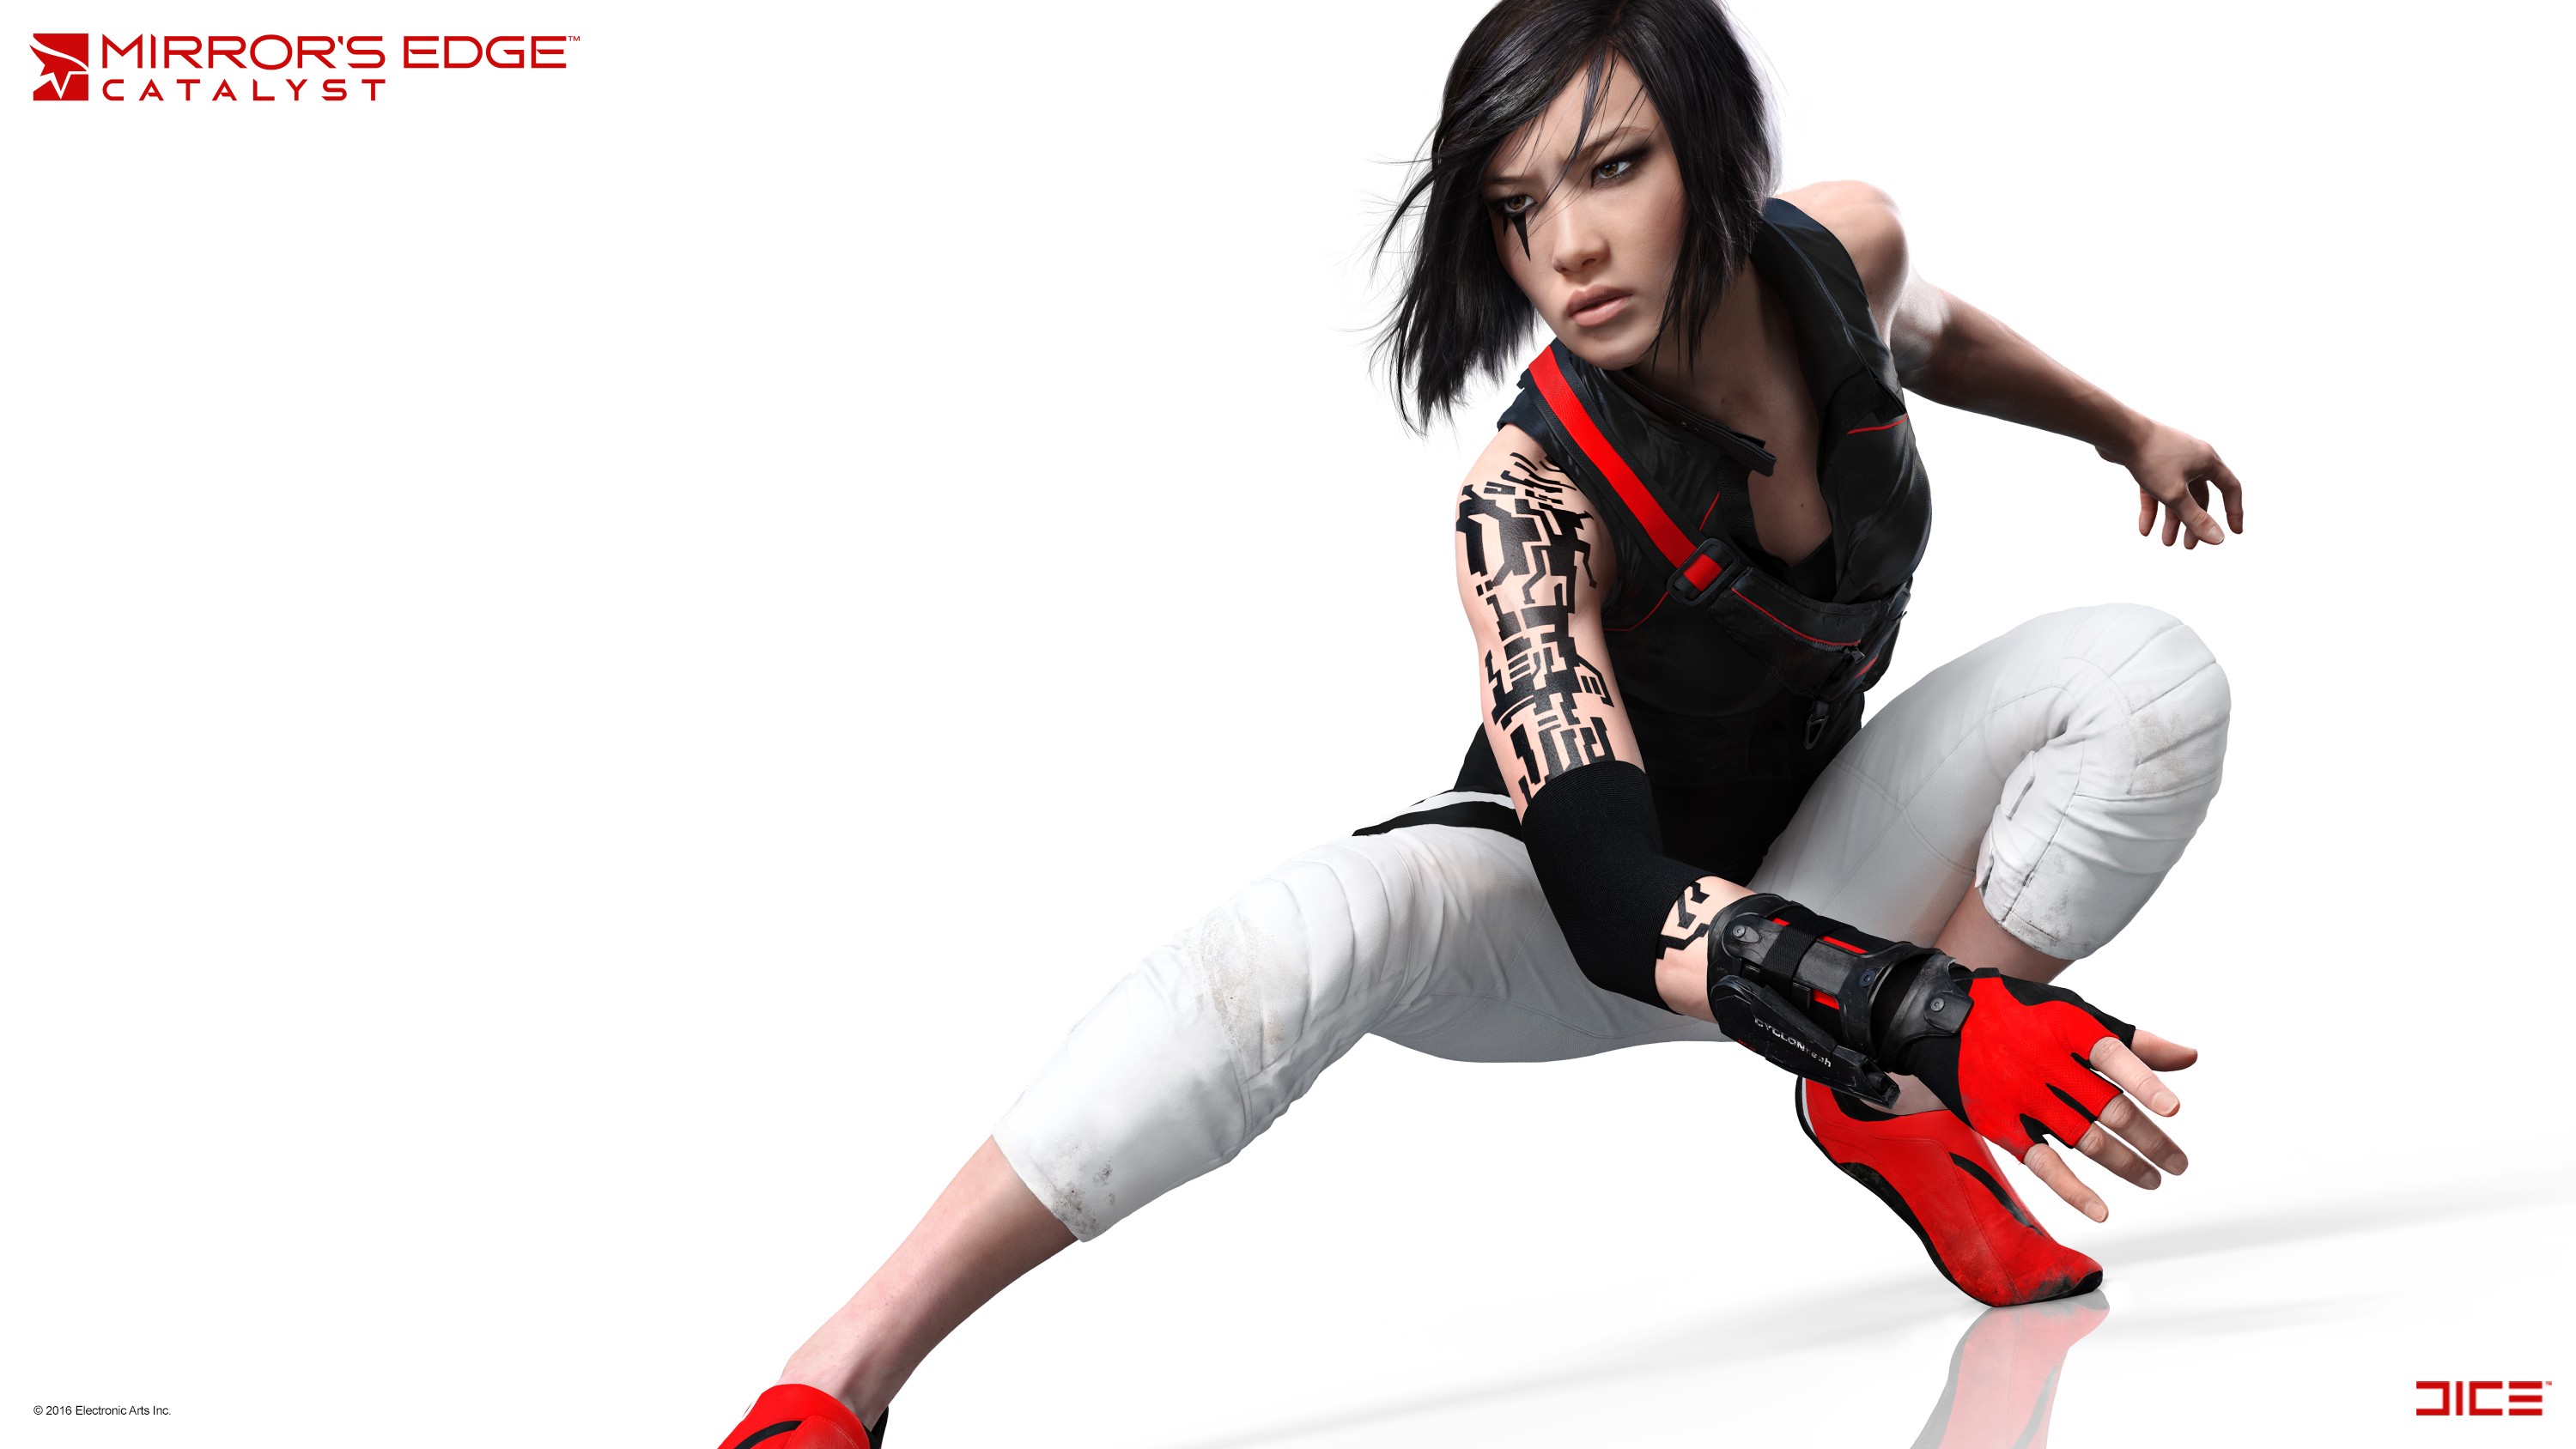 General 3000x1688 Mirror's Edge Mirror's Edge Catalyst EA DICE Faith Connors dark hair simple background video games PC gaming women video game art video game girls Electronic Arts logo watermarked